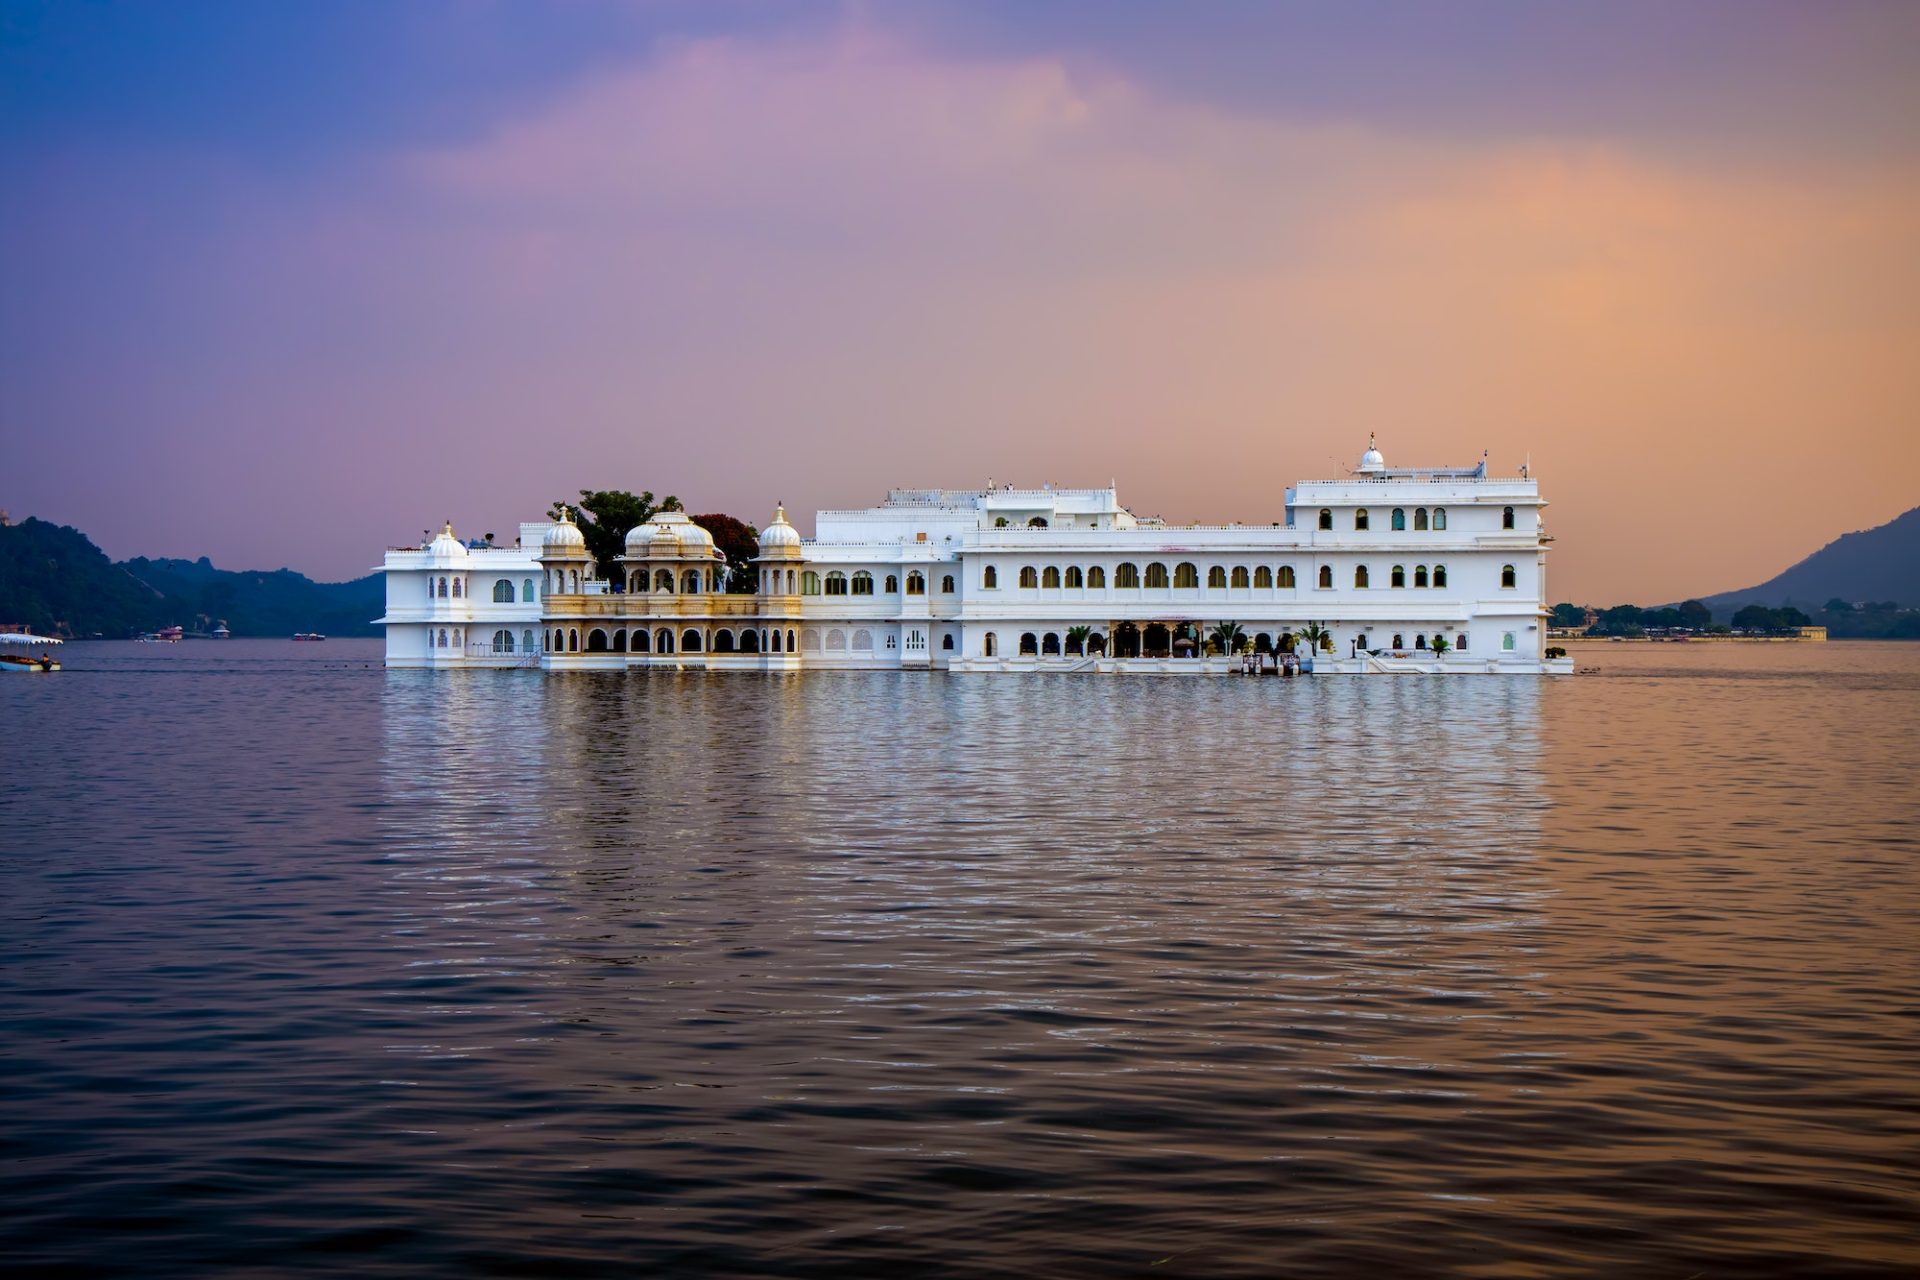 Udaipur , also known as the City of Lakes, is a city in the state of Rajasthan in India.